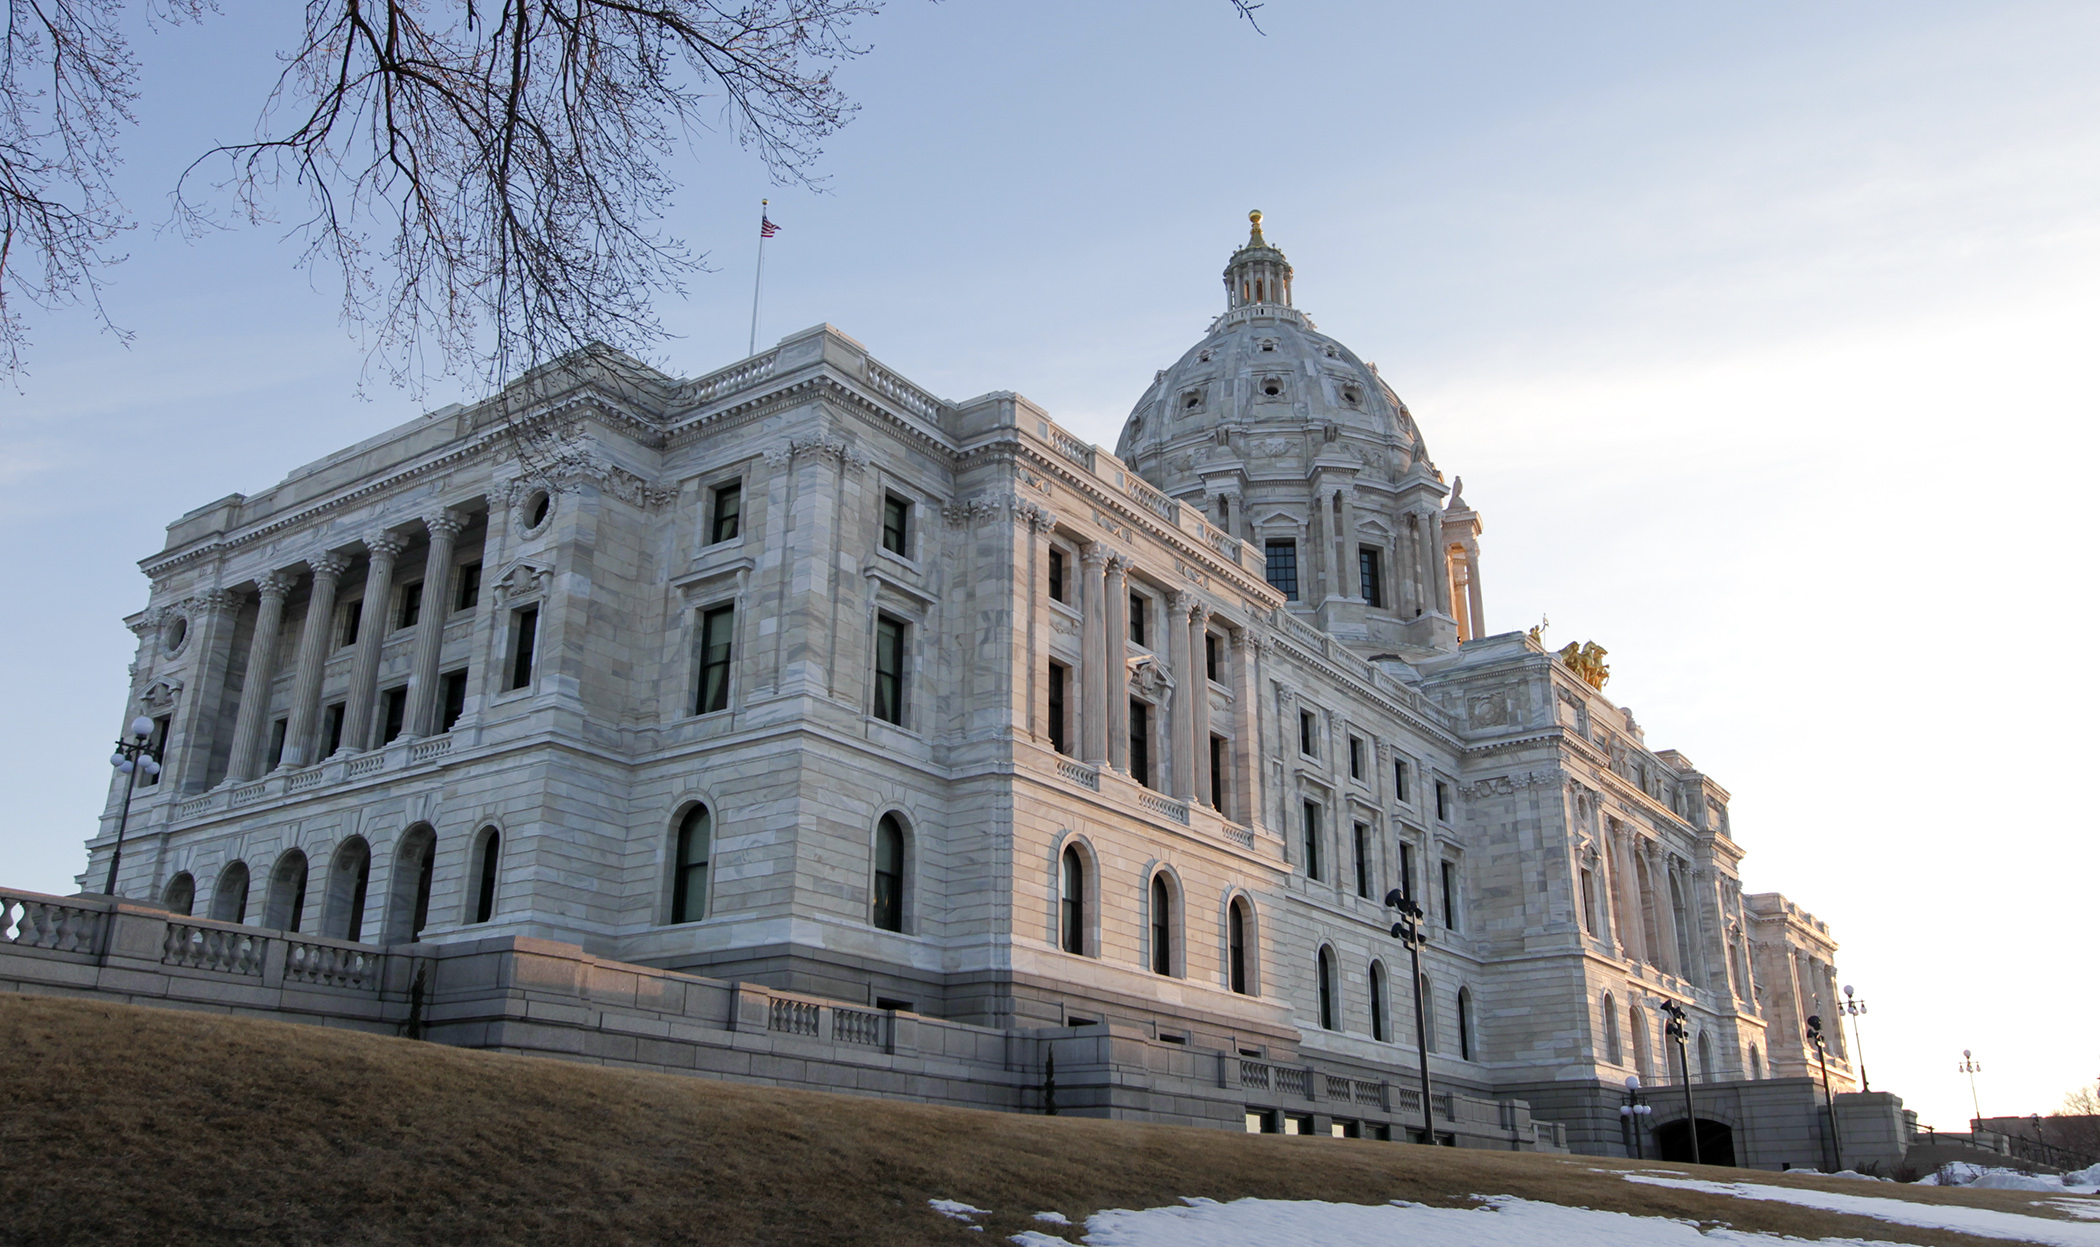 Every year, legislators have to figure out how state tax law must be altered to bring Minnesota into line with changes made in Washington, D.C. And sometimes the lag between changes costs Minnesotans money. House Photography file photo